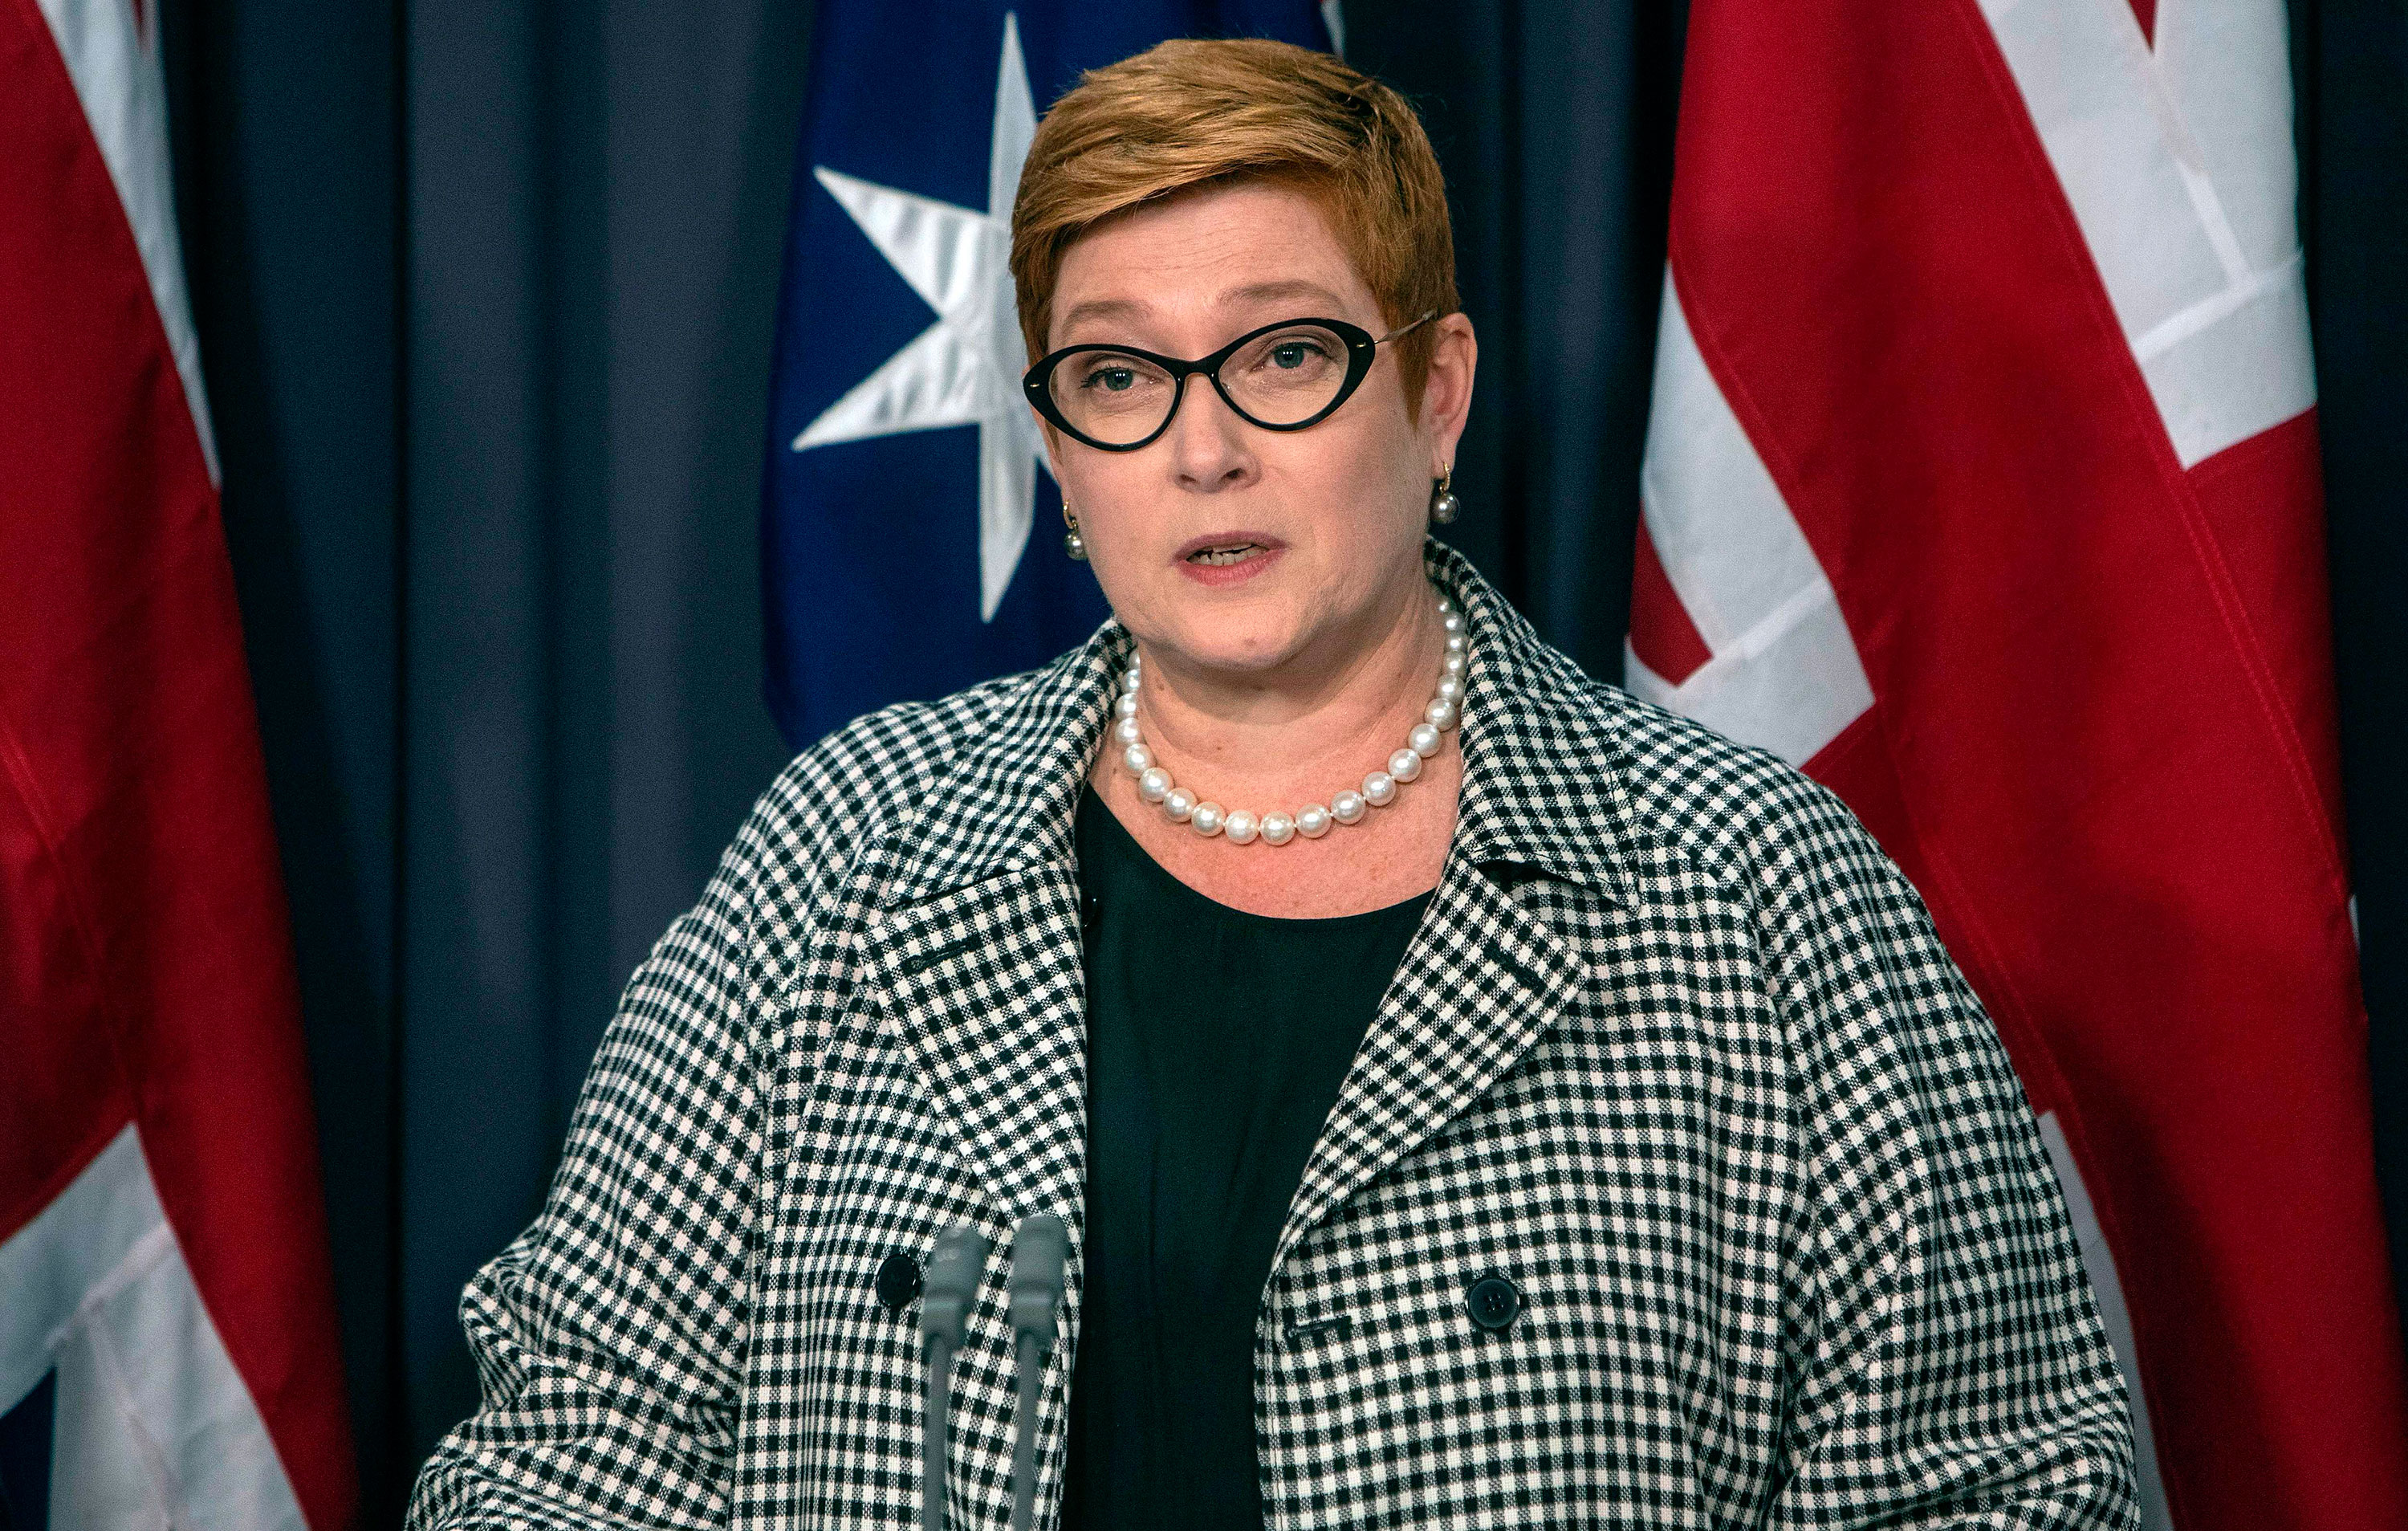 Australian Foreign Minister Marise Payne speaks at a joint press conference with Britain's Foreign Secretary Dominic Raab (not pictured) in Canberra on February 6, 2020. - Raab is on a two day official visit to hold talks on bilateral issues with Australian officials. (Photo by Andrew Taylor / AFP) (Photo by ANDREW TAYLOR/AFP via Getty Images)